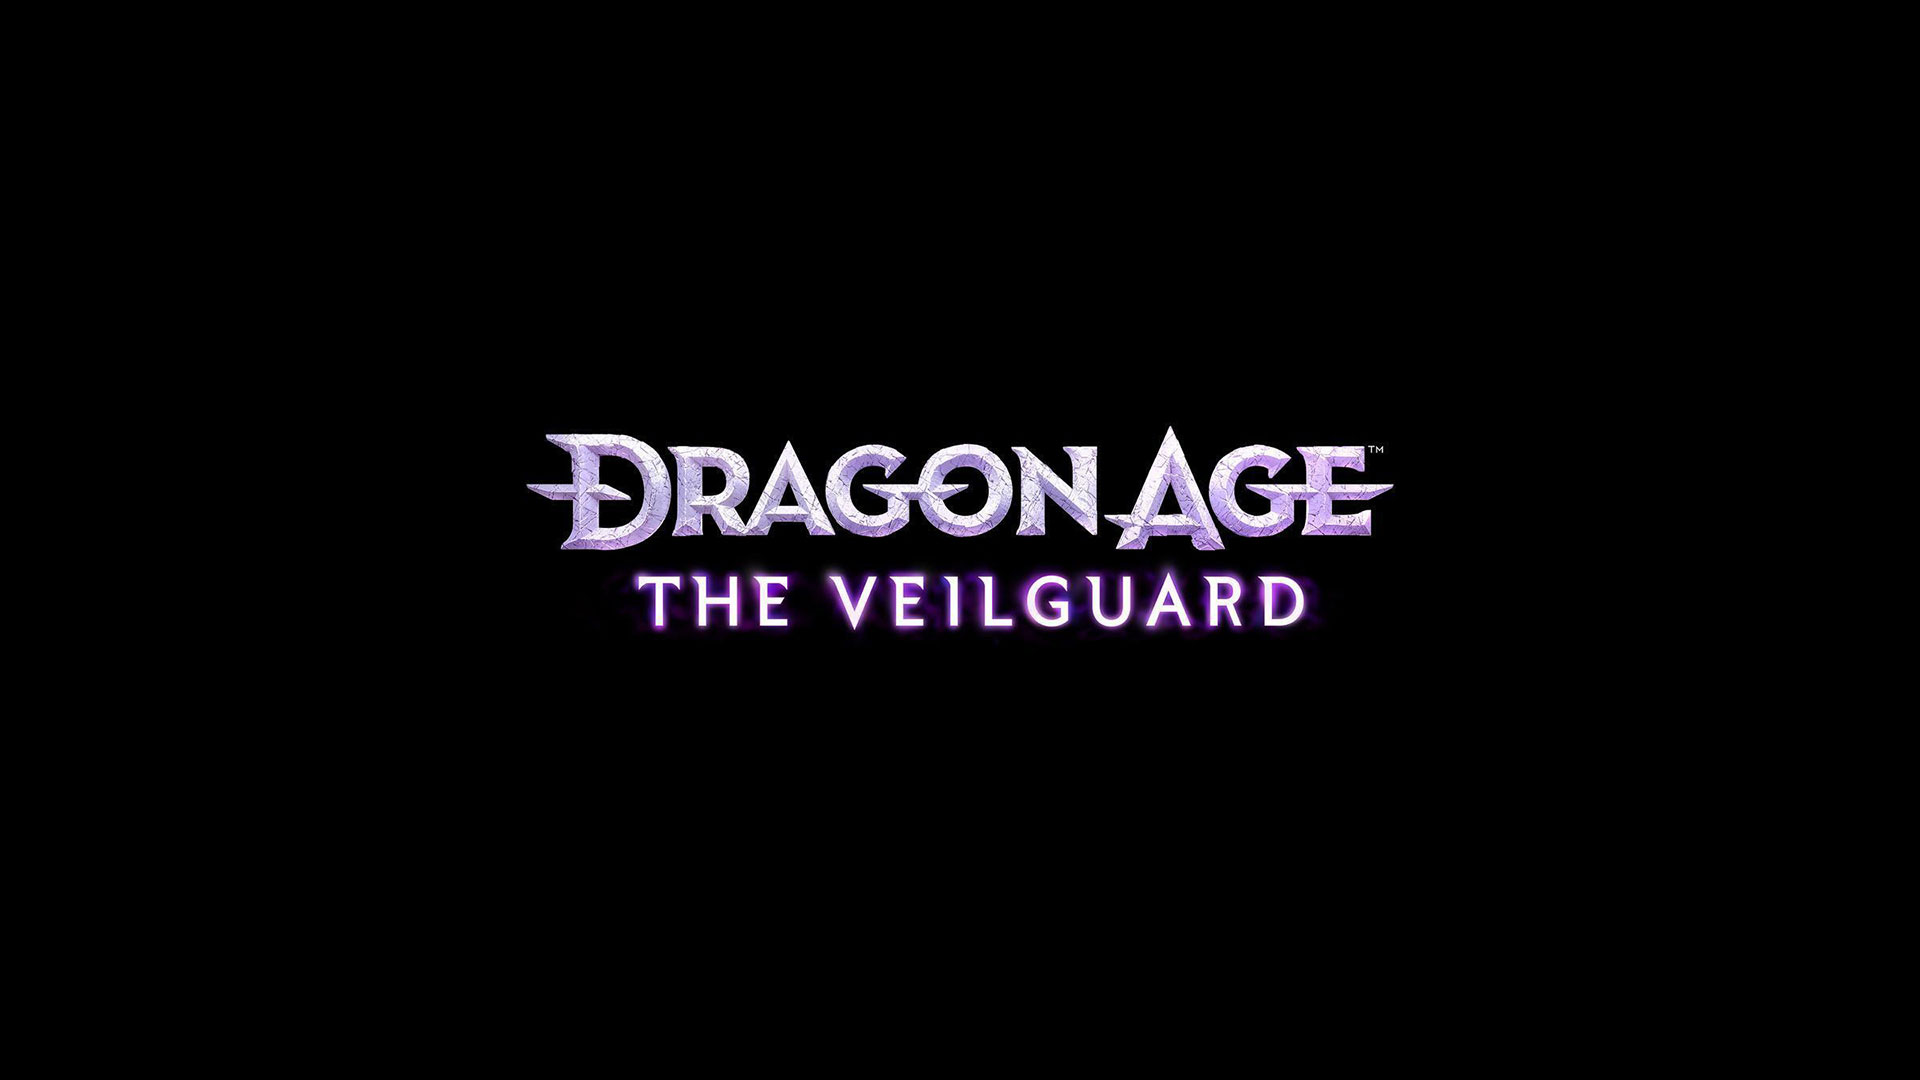 Dragon Age: The Veilguard will be unveiled on June 11